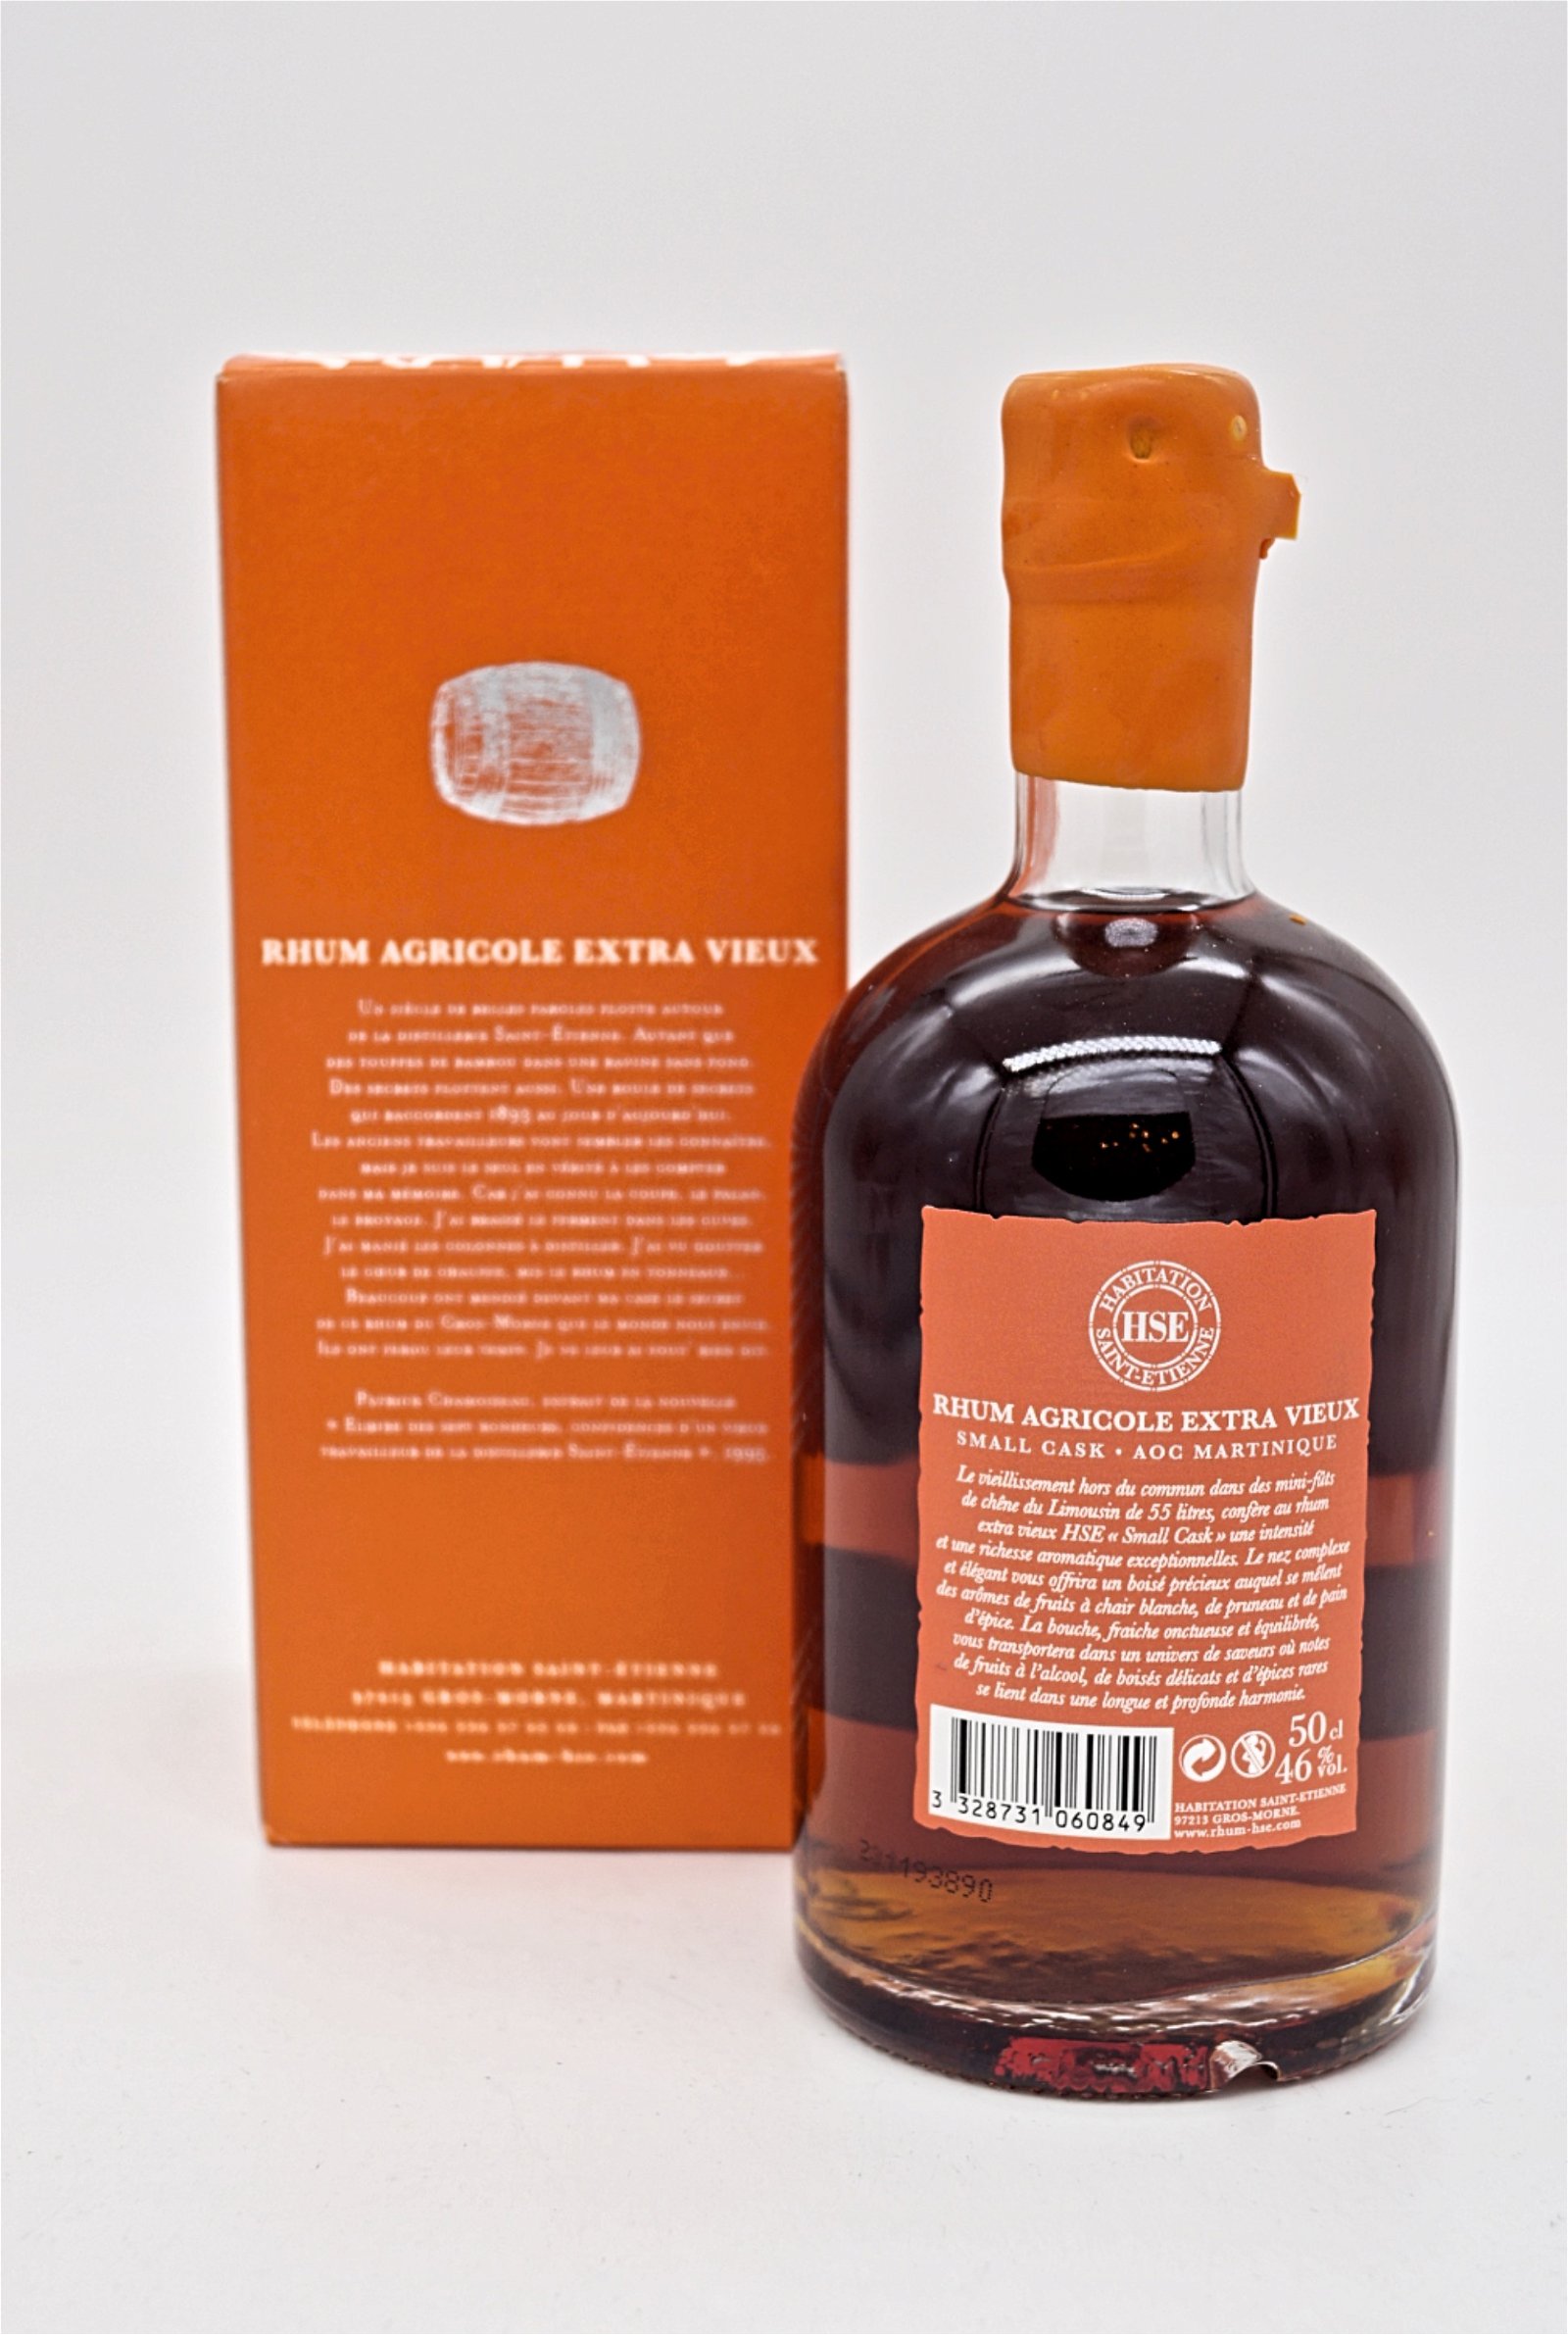 HSE 2011 Small Cask Rhum Agricole Extra Vieux 